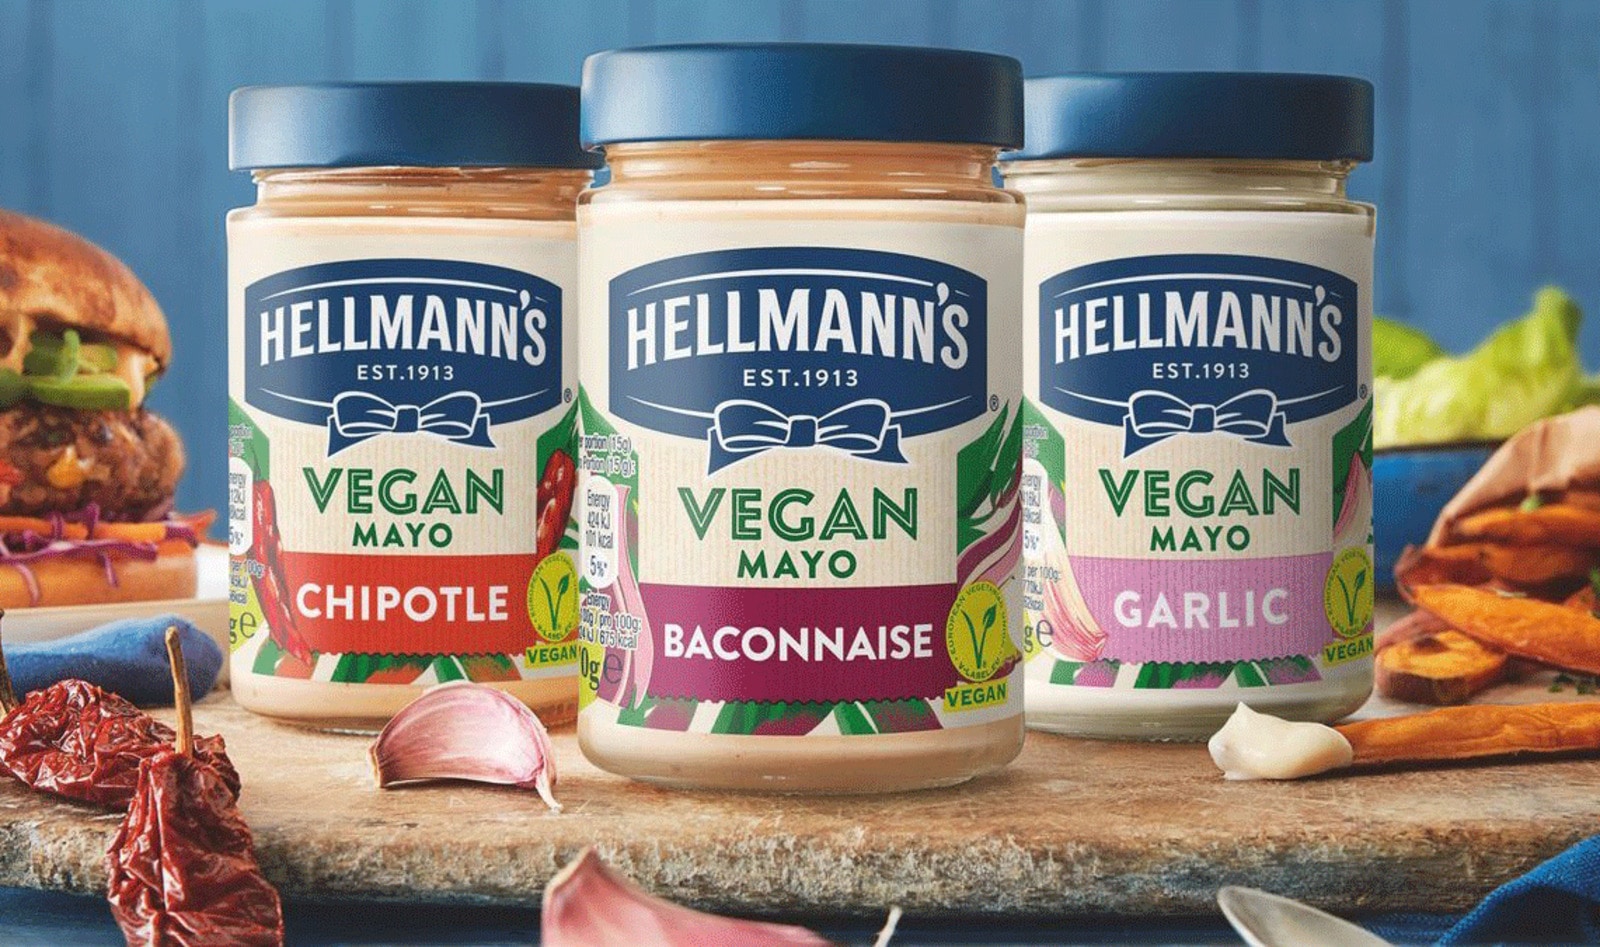 Hellmann’s Launches Vegan Bacon, Chipotle &amp; Garlic Mayo Flavors in Time for Veganuary&nbsp;